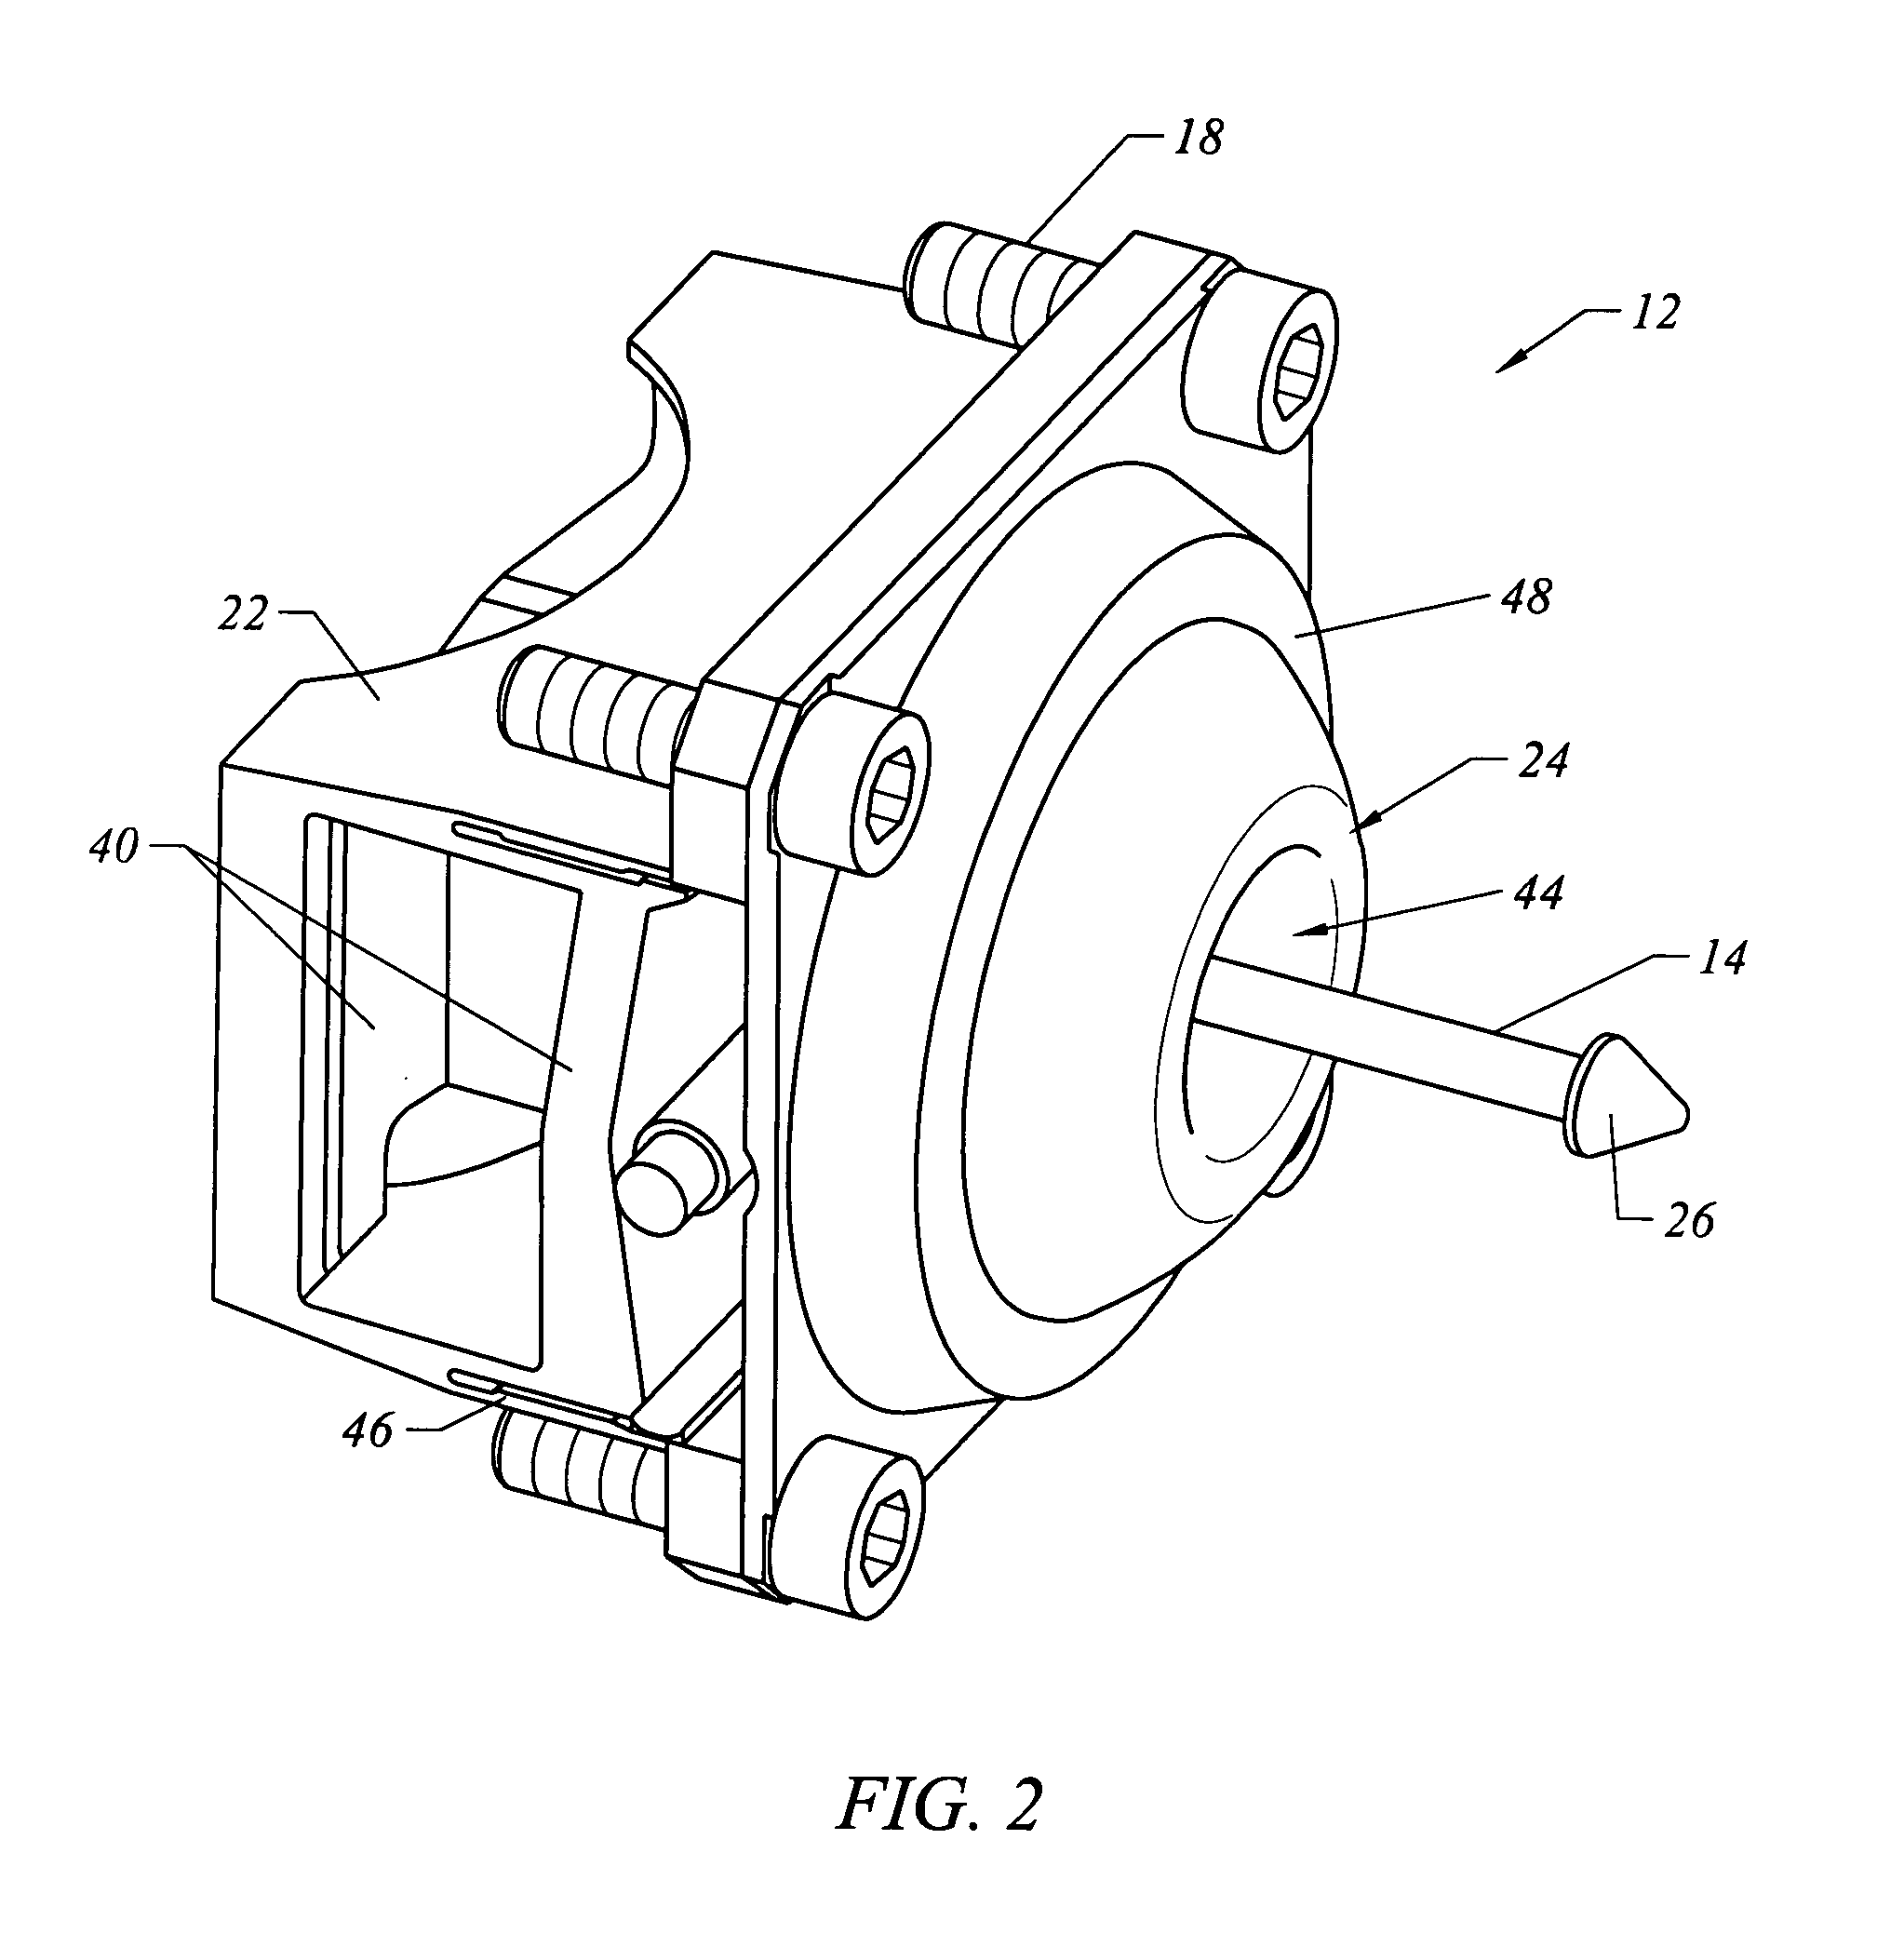 Automated latching device with active damping